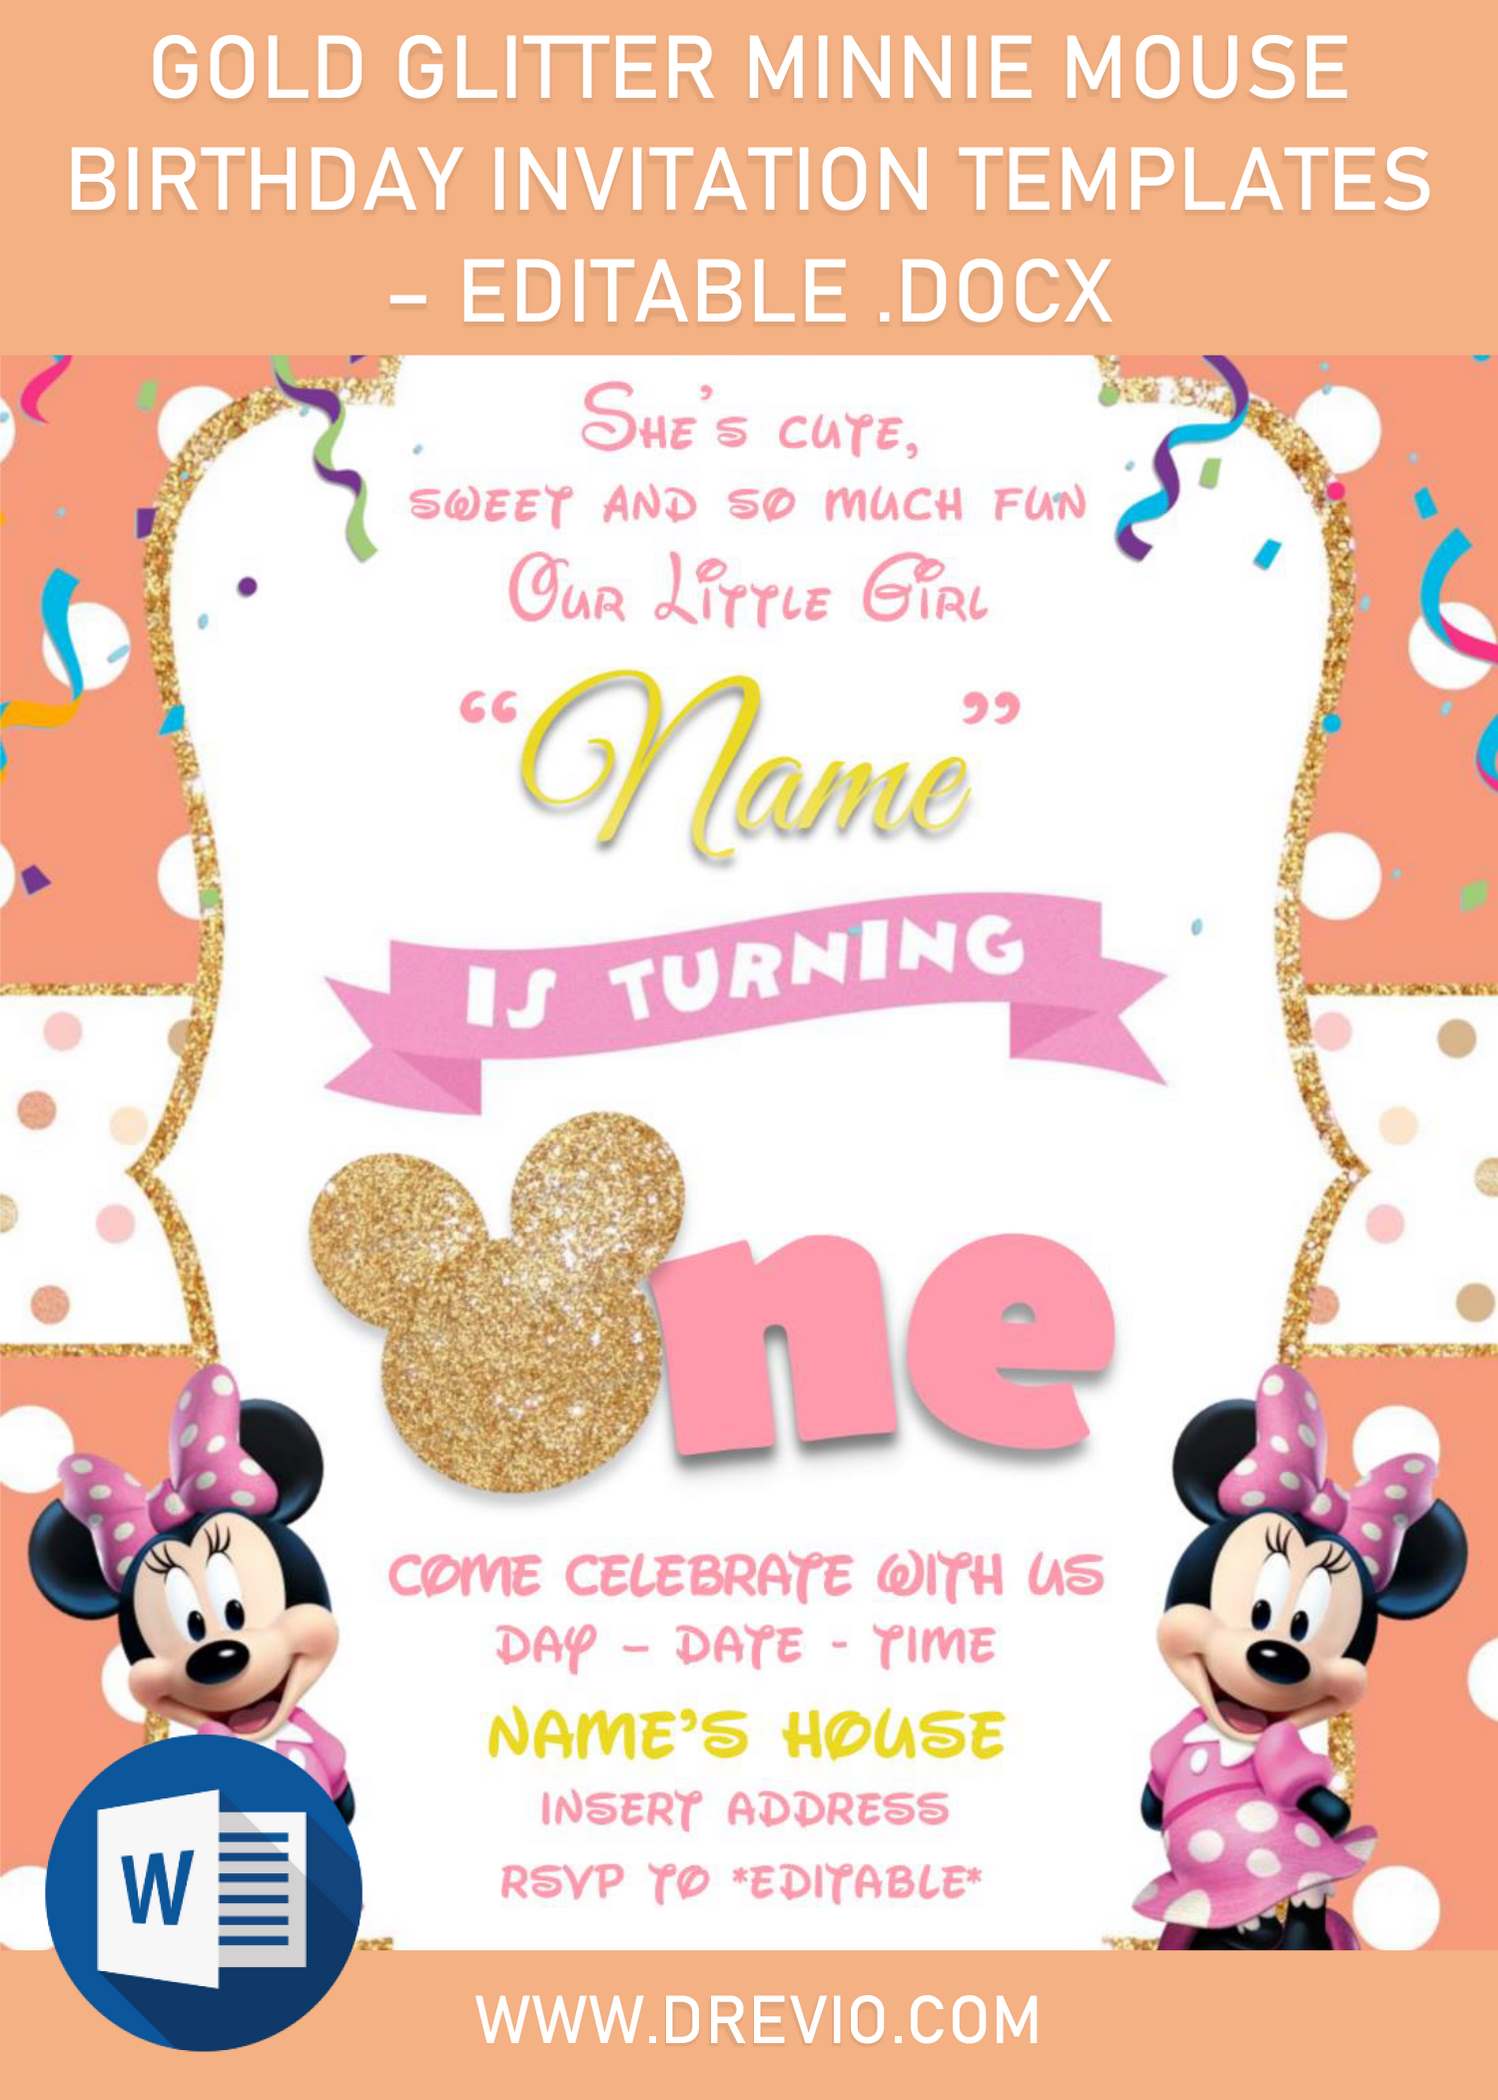 Gold Glitter Minnie Mouse Birthday Invitation Templates - Editable With MS Word and has colorful confetti